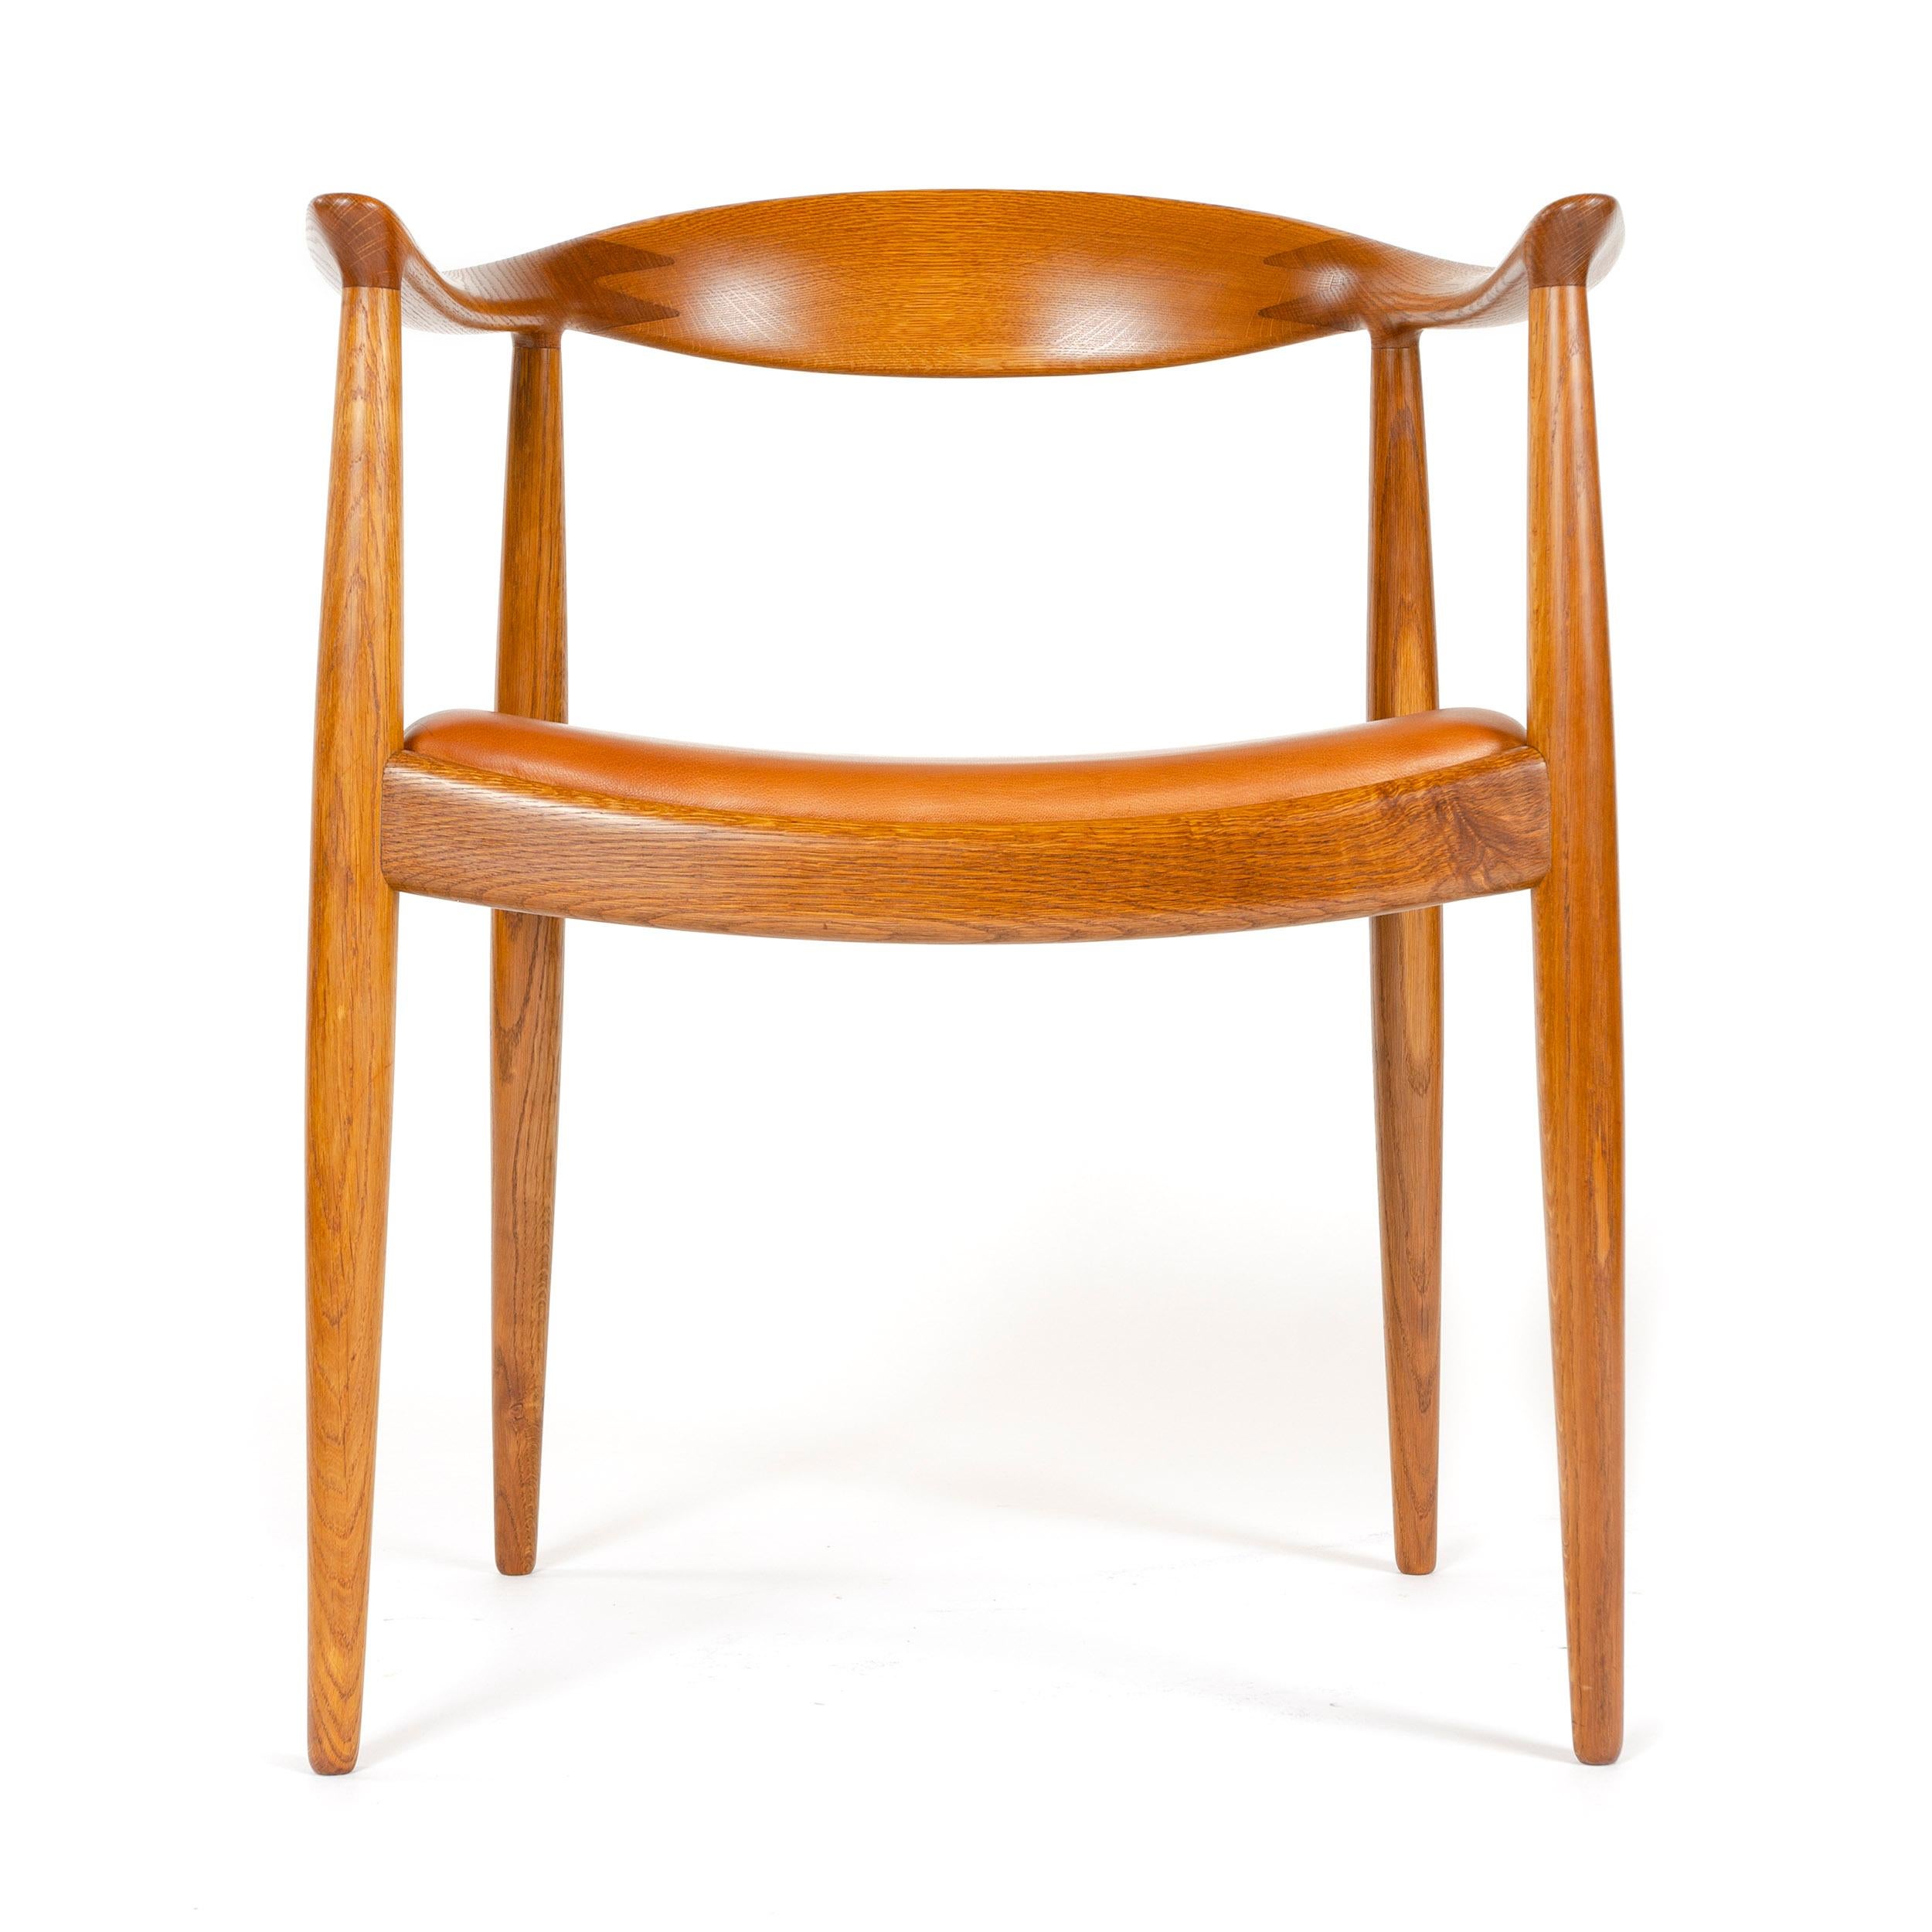 A newly upholstered oak 'round' chair produced previous to 1954, with original impressed stamp,
'Johannes Hansen COPENHAGEN DENMARK'. Model JH-501.
  